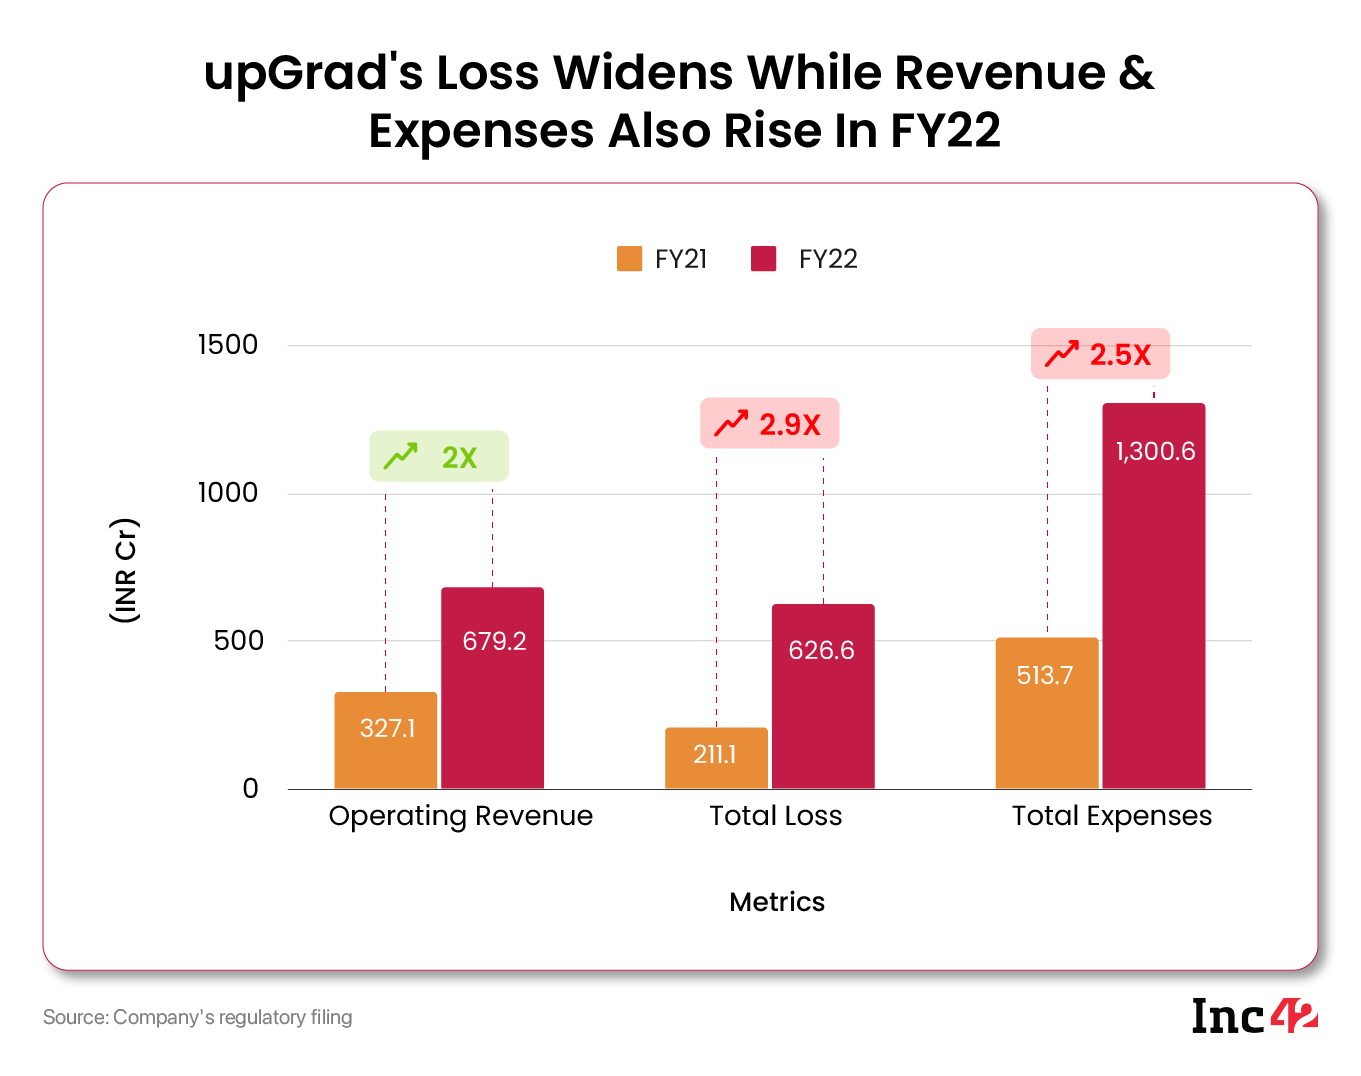 upGrad’s Loss Rises About 3X To INR 626.6 Cr In FY22 As Expenses Shoot Up